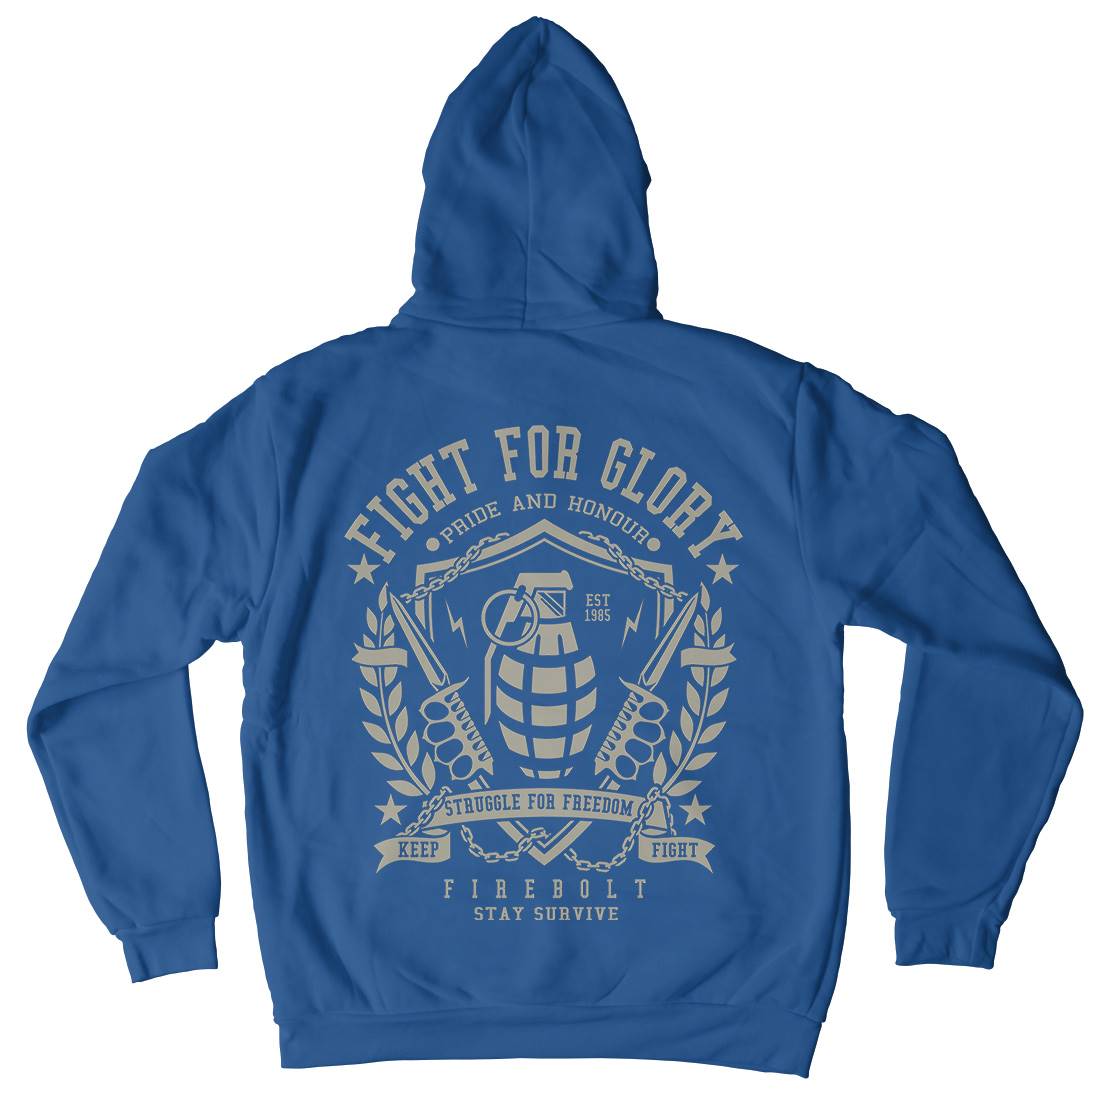 Grenade Mens Hoodie With Pocket Army A061